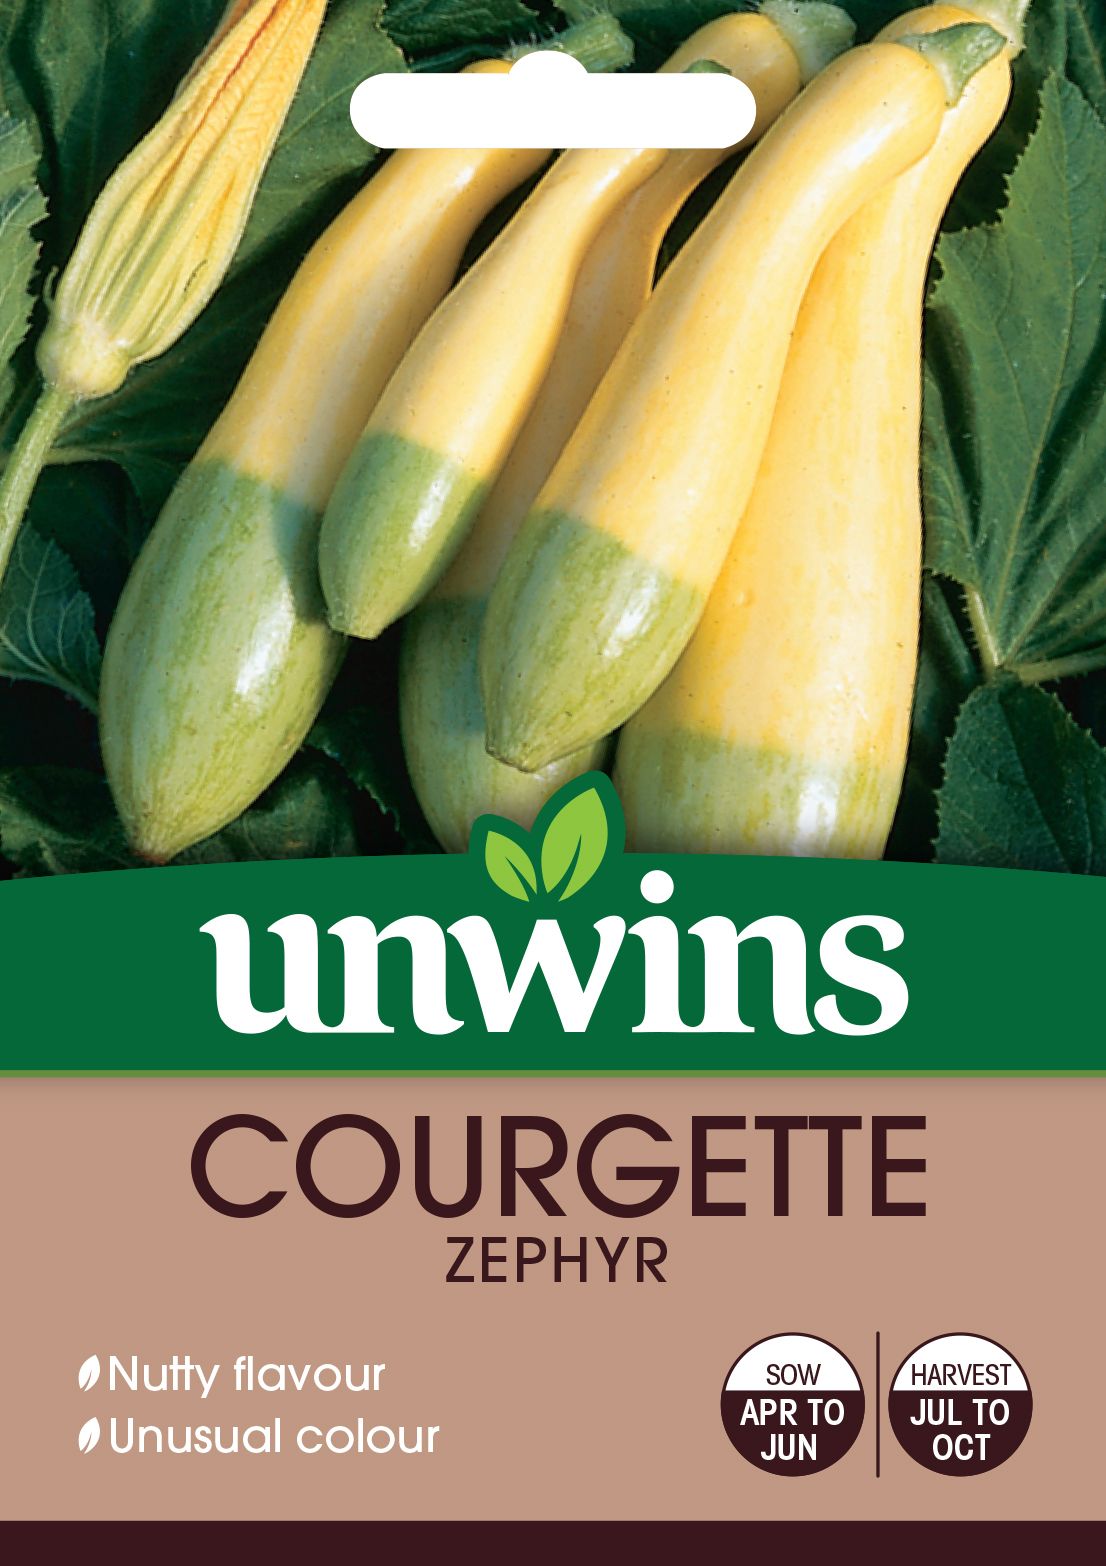 Courgette Zephyr